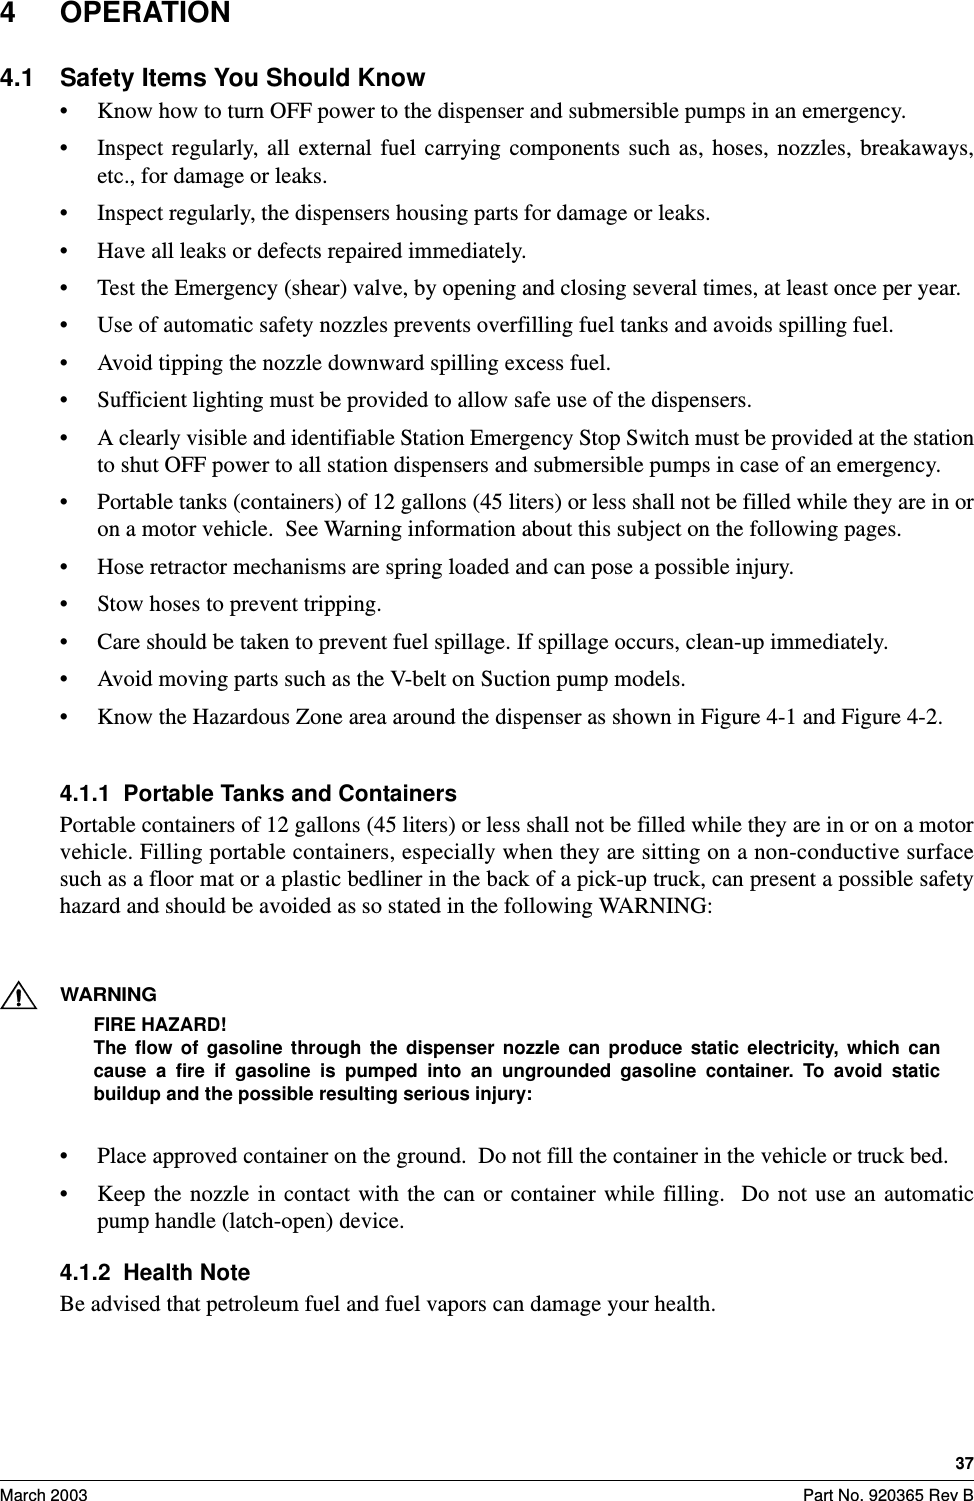 37March 2003 Part No. 920365 Rev B4 OPERATION4.1 Safety Items You Should Know• Know how to turn OFF power to the dispenser and submersible pumps in an emergency.• Inspect  regularly,  all  external  fuel  carrying  components  such  as,  hoses,  nozzles,  breakaways,etc., for damage or leaks. • Inspect regularly, the dispensers housing parts for damage or leaks.• Have all leaks or defects repaired immediately.• Test the Emergency (shear) valve, by opening and closing several times, at least once per year.• Use of automatic safety nozzles prevents overfilling fuel tanks and avoids spilling fuel.• Avoid tipping the nozzle downward spilling excess fuel.• Sufficient lighting must be provided to allow safe use of the dispensers.• A clearly visible and identifiable Station Emergency Stop Switch must be provided at the stationto shut OFF power to all station dispensers and submersible pumps in case of an emergency.• Portable tanks (containers) of 12 gallons (45 liters) or less shall not be filled while they are in oron a motor vehicle.  See Warning information about this subject on the following pages. • Hose retractor mechanisms are spring loaded and can pose a possible injury.• Stow hoses to prevent tripping.• Care should be taken to prevent fuel spillage. If spillage occurs, clean-up immediately.• Avoid moving parts such as the V-belt on Suction pump models.• Know the Hazardous Zone area around the dispenser as shown in Figure 4-1 and Figure 4-2.4.1.1  Portable Tanks and Containers Portable containers of 12 gallons (45 liters) or less shall not be filled while they are in or on a motorvehicle. Filling portable containers, especially when they are sitting on a non-conductive surfacesuch as a floor mat or a plastic bedliner in the back of a pick-up truck, can present a possible safetyhazard and should be avoided as so stated in the following WARNING: WARNINGFIRE HAZARD!The  flow  of  gasoline  through  the  dispenser  nozzle  can  produce  static  electricity,  which  cancause  a  fire  if  gasoline  is  pumped  into  an  ungrounded  gasoline  container.  To  avoid  staticbuildup and the possible resulting serious injury:• Place approved container on the ground.  Do not fill the container in the vehicle or truck bed.• Keep  the  nozzle  in  contact with  the  can  or  container  while  filling.    Do  not  use  an  automaticpump handle (latch-open) device.4.1.2  Health NoteBe advised that petroleum fuel and fuel vapors can damage your health.